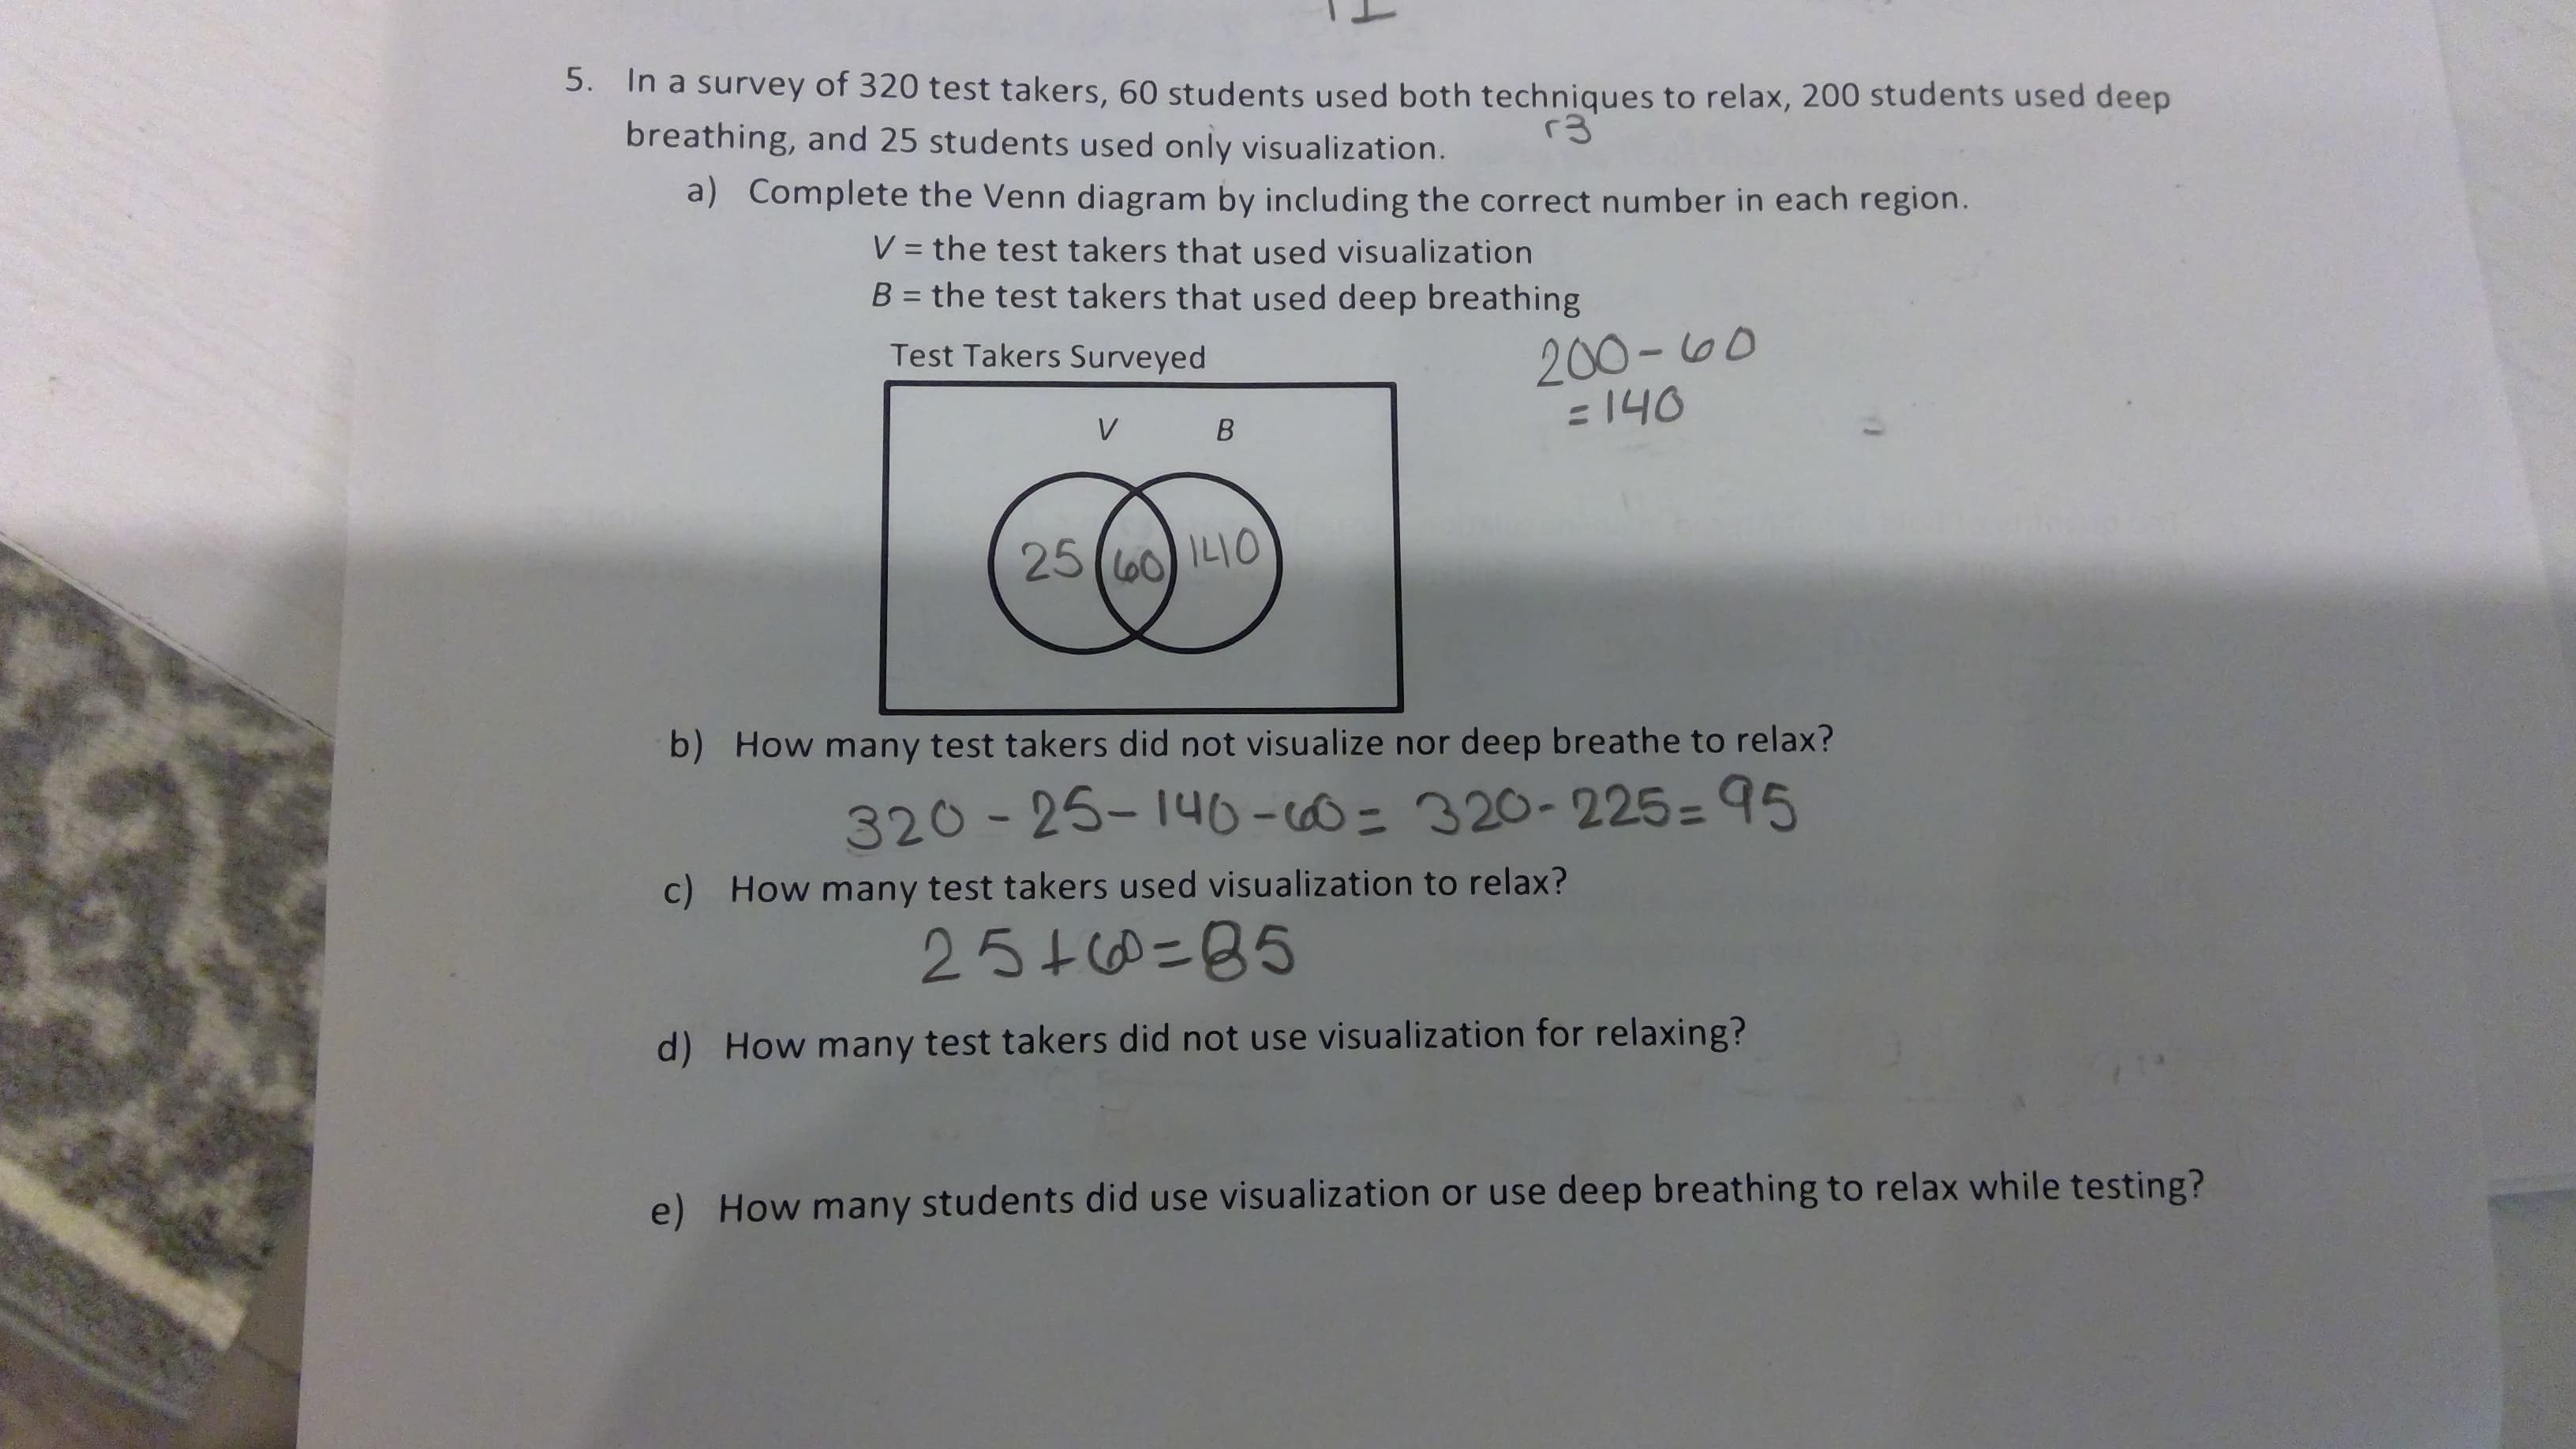 5. In a survey of 320 test takers, 60 students used both techniques to relax, 200 students used deep
breathing, and 25 students used only visualization.
r3
a) Complete the Venn diagram by including the correct number in each region.
- the test takers that used visualization
B = the test ta ke rs that used deep breathing
200-100
= 140
Test Takers Surveyed
V B
25(lo0 IL0
b) How many test takers did not visualize nor deep breathe to relax?
320-25-146-0- 320-2 25= 95
c) How many test takerss used visualization to relax?
2510-85
d) How many test takers did not use visualization for relaxing?
e) How many students did use visualization or use deep breathing to relax while testing?
